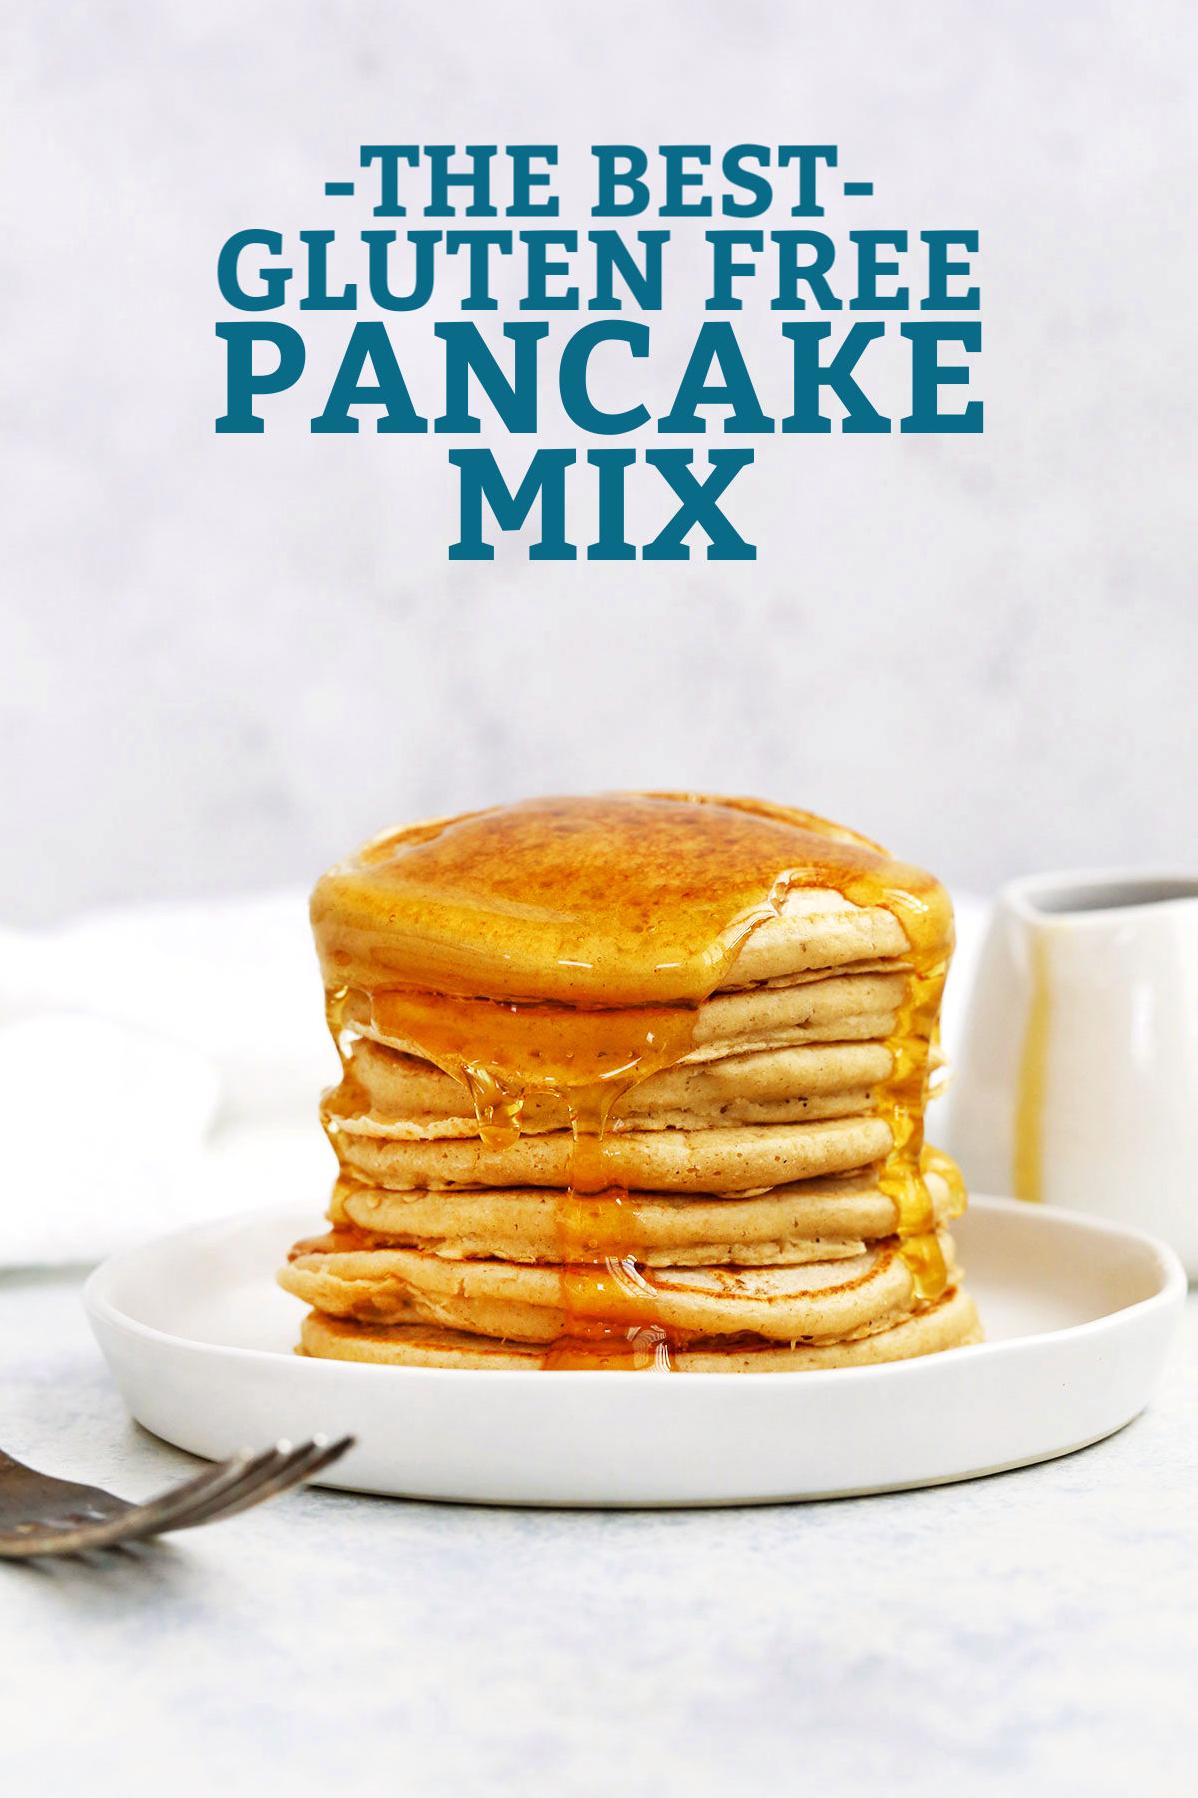  Who says gluten-free means taste-free? These pancakes will prove them wrong!